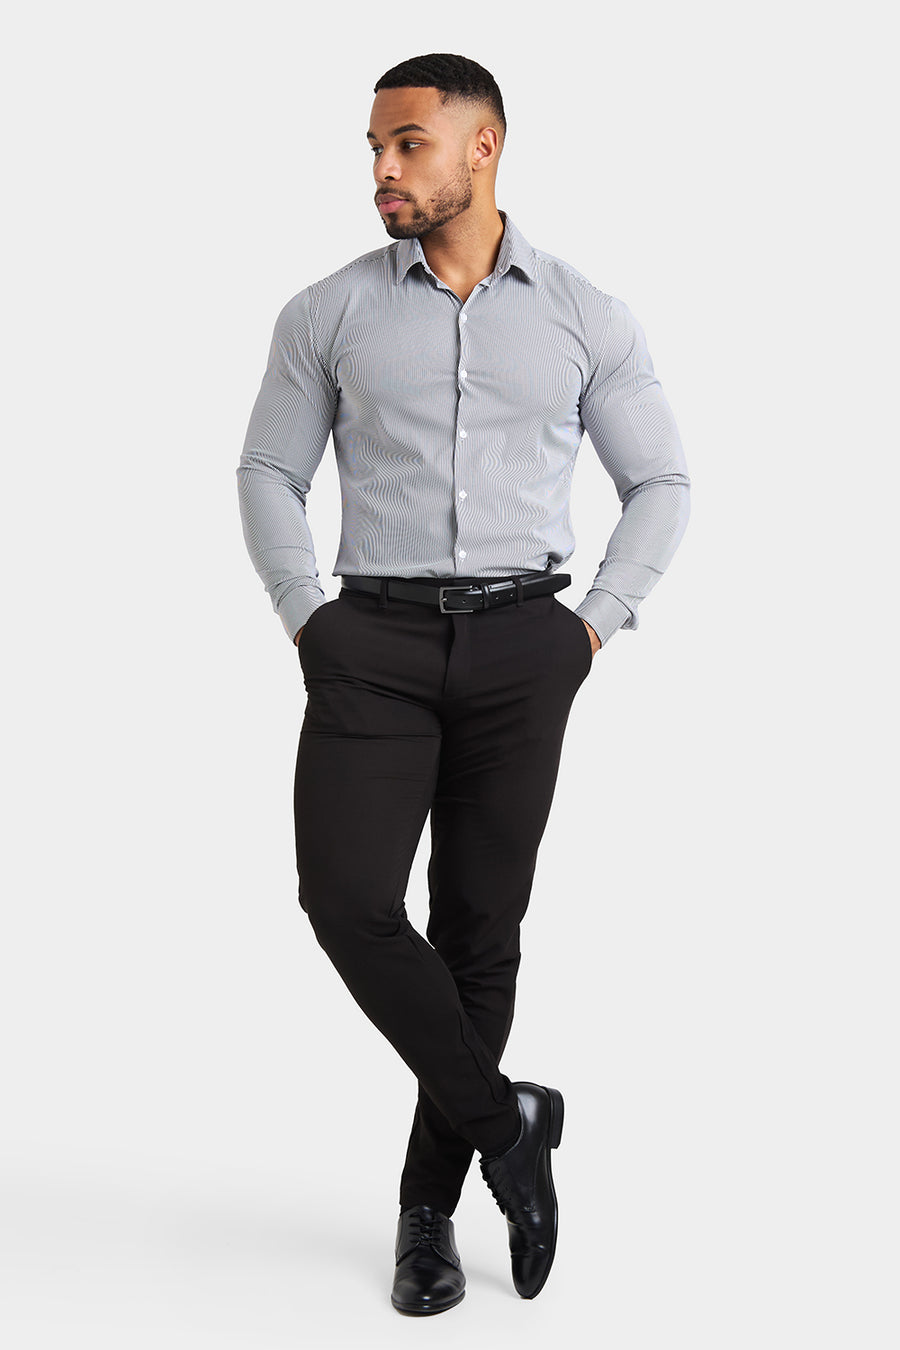 Performance Business Shirt in Navy Fine Stripe - TAILORED ATHLETE - USA